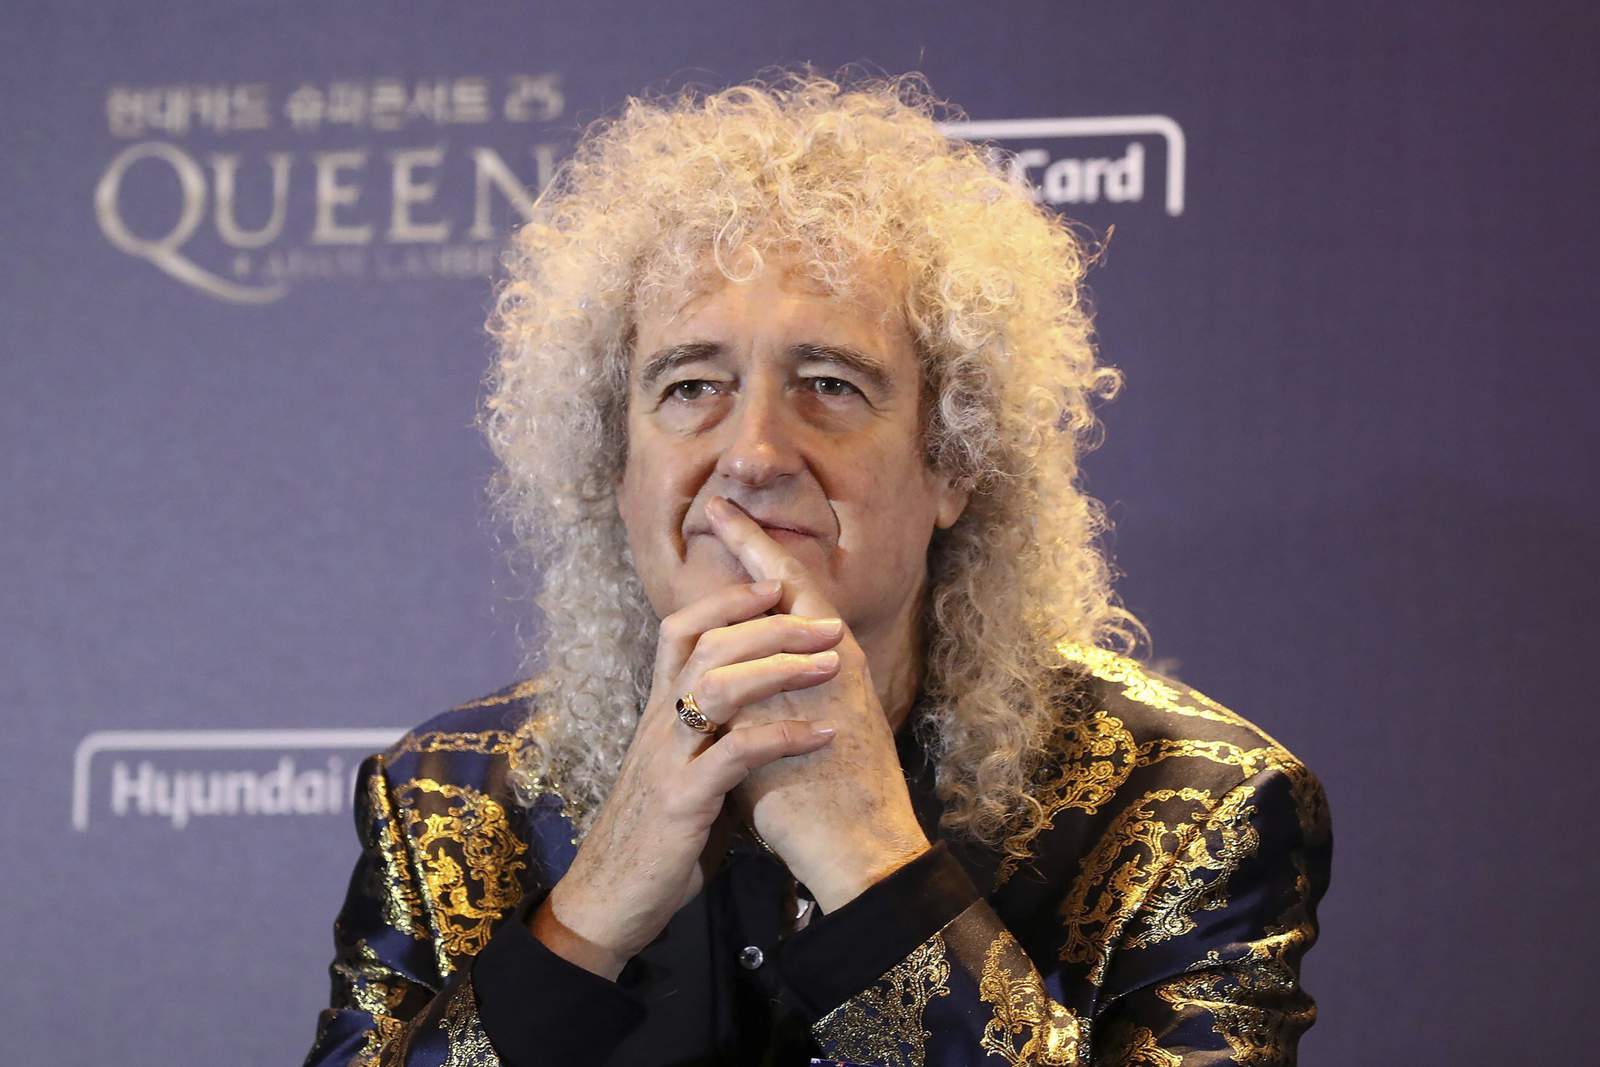 Brian May reveals recent heart attack, says he's good now